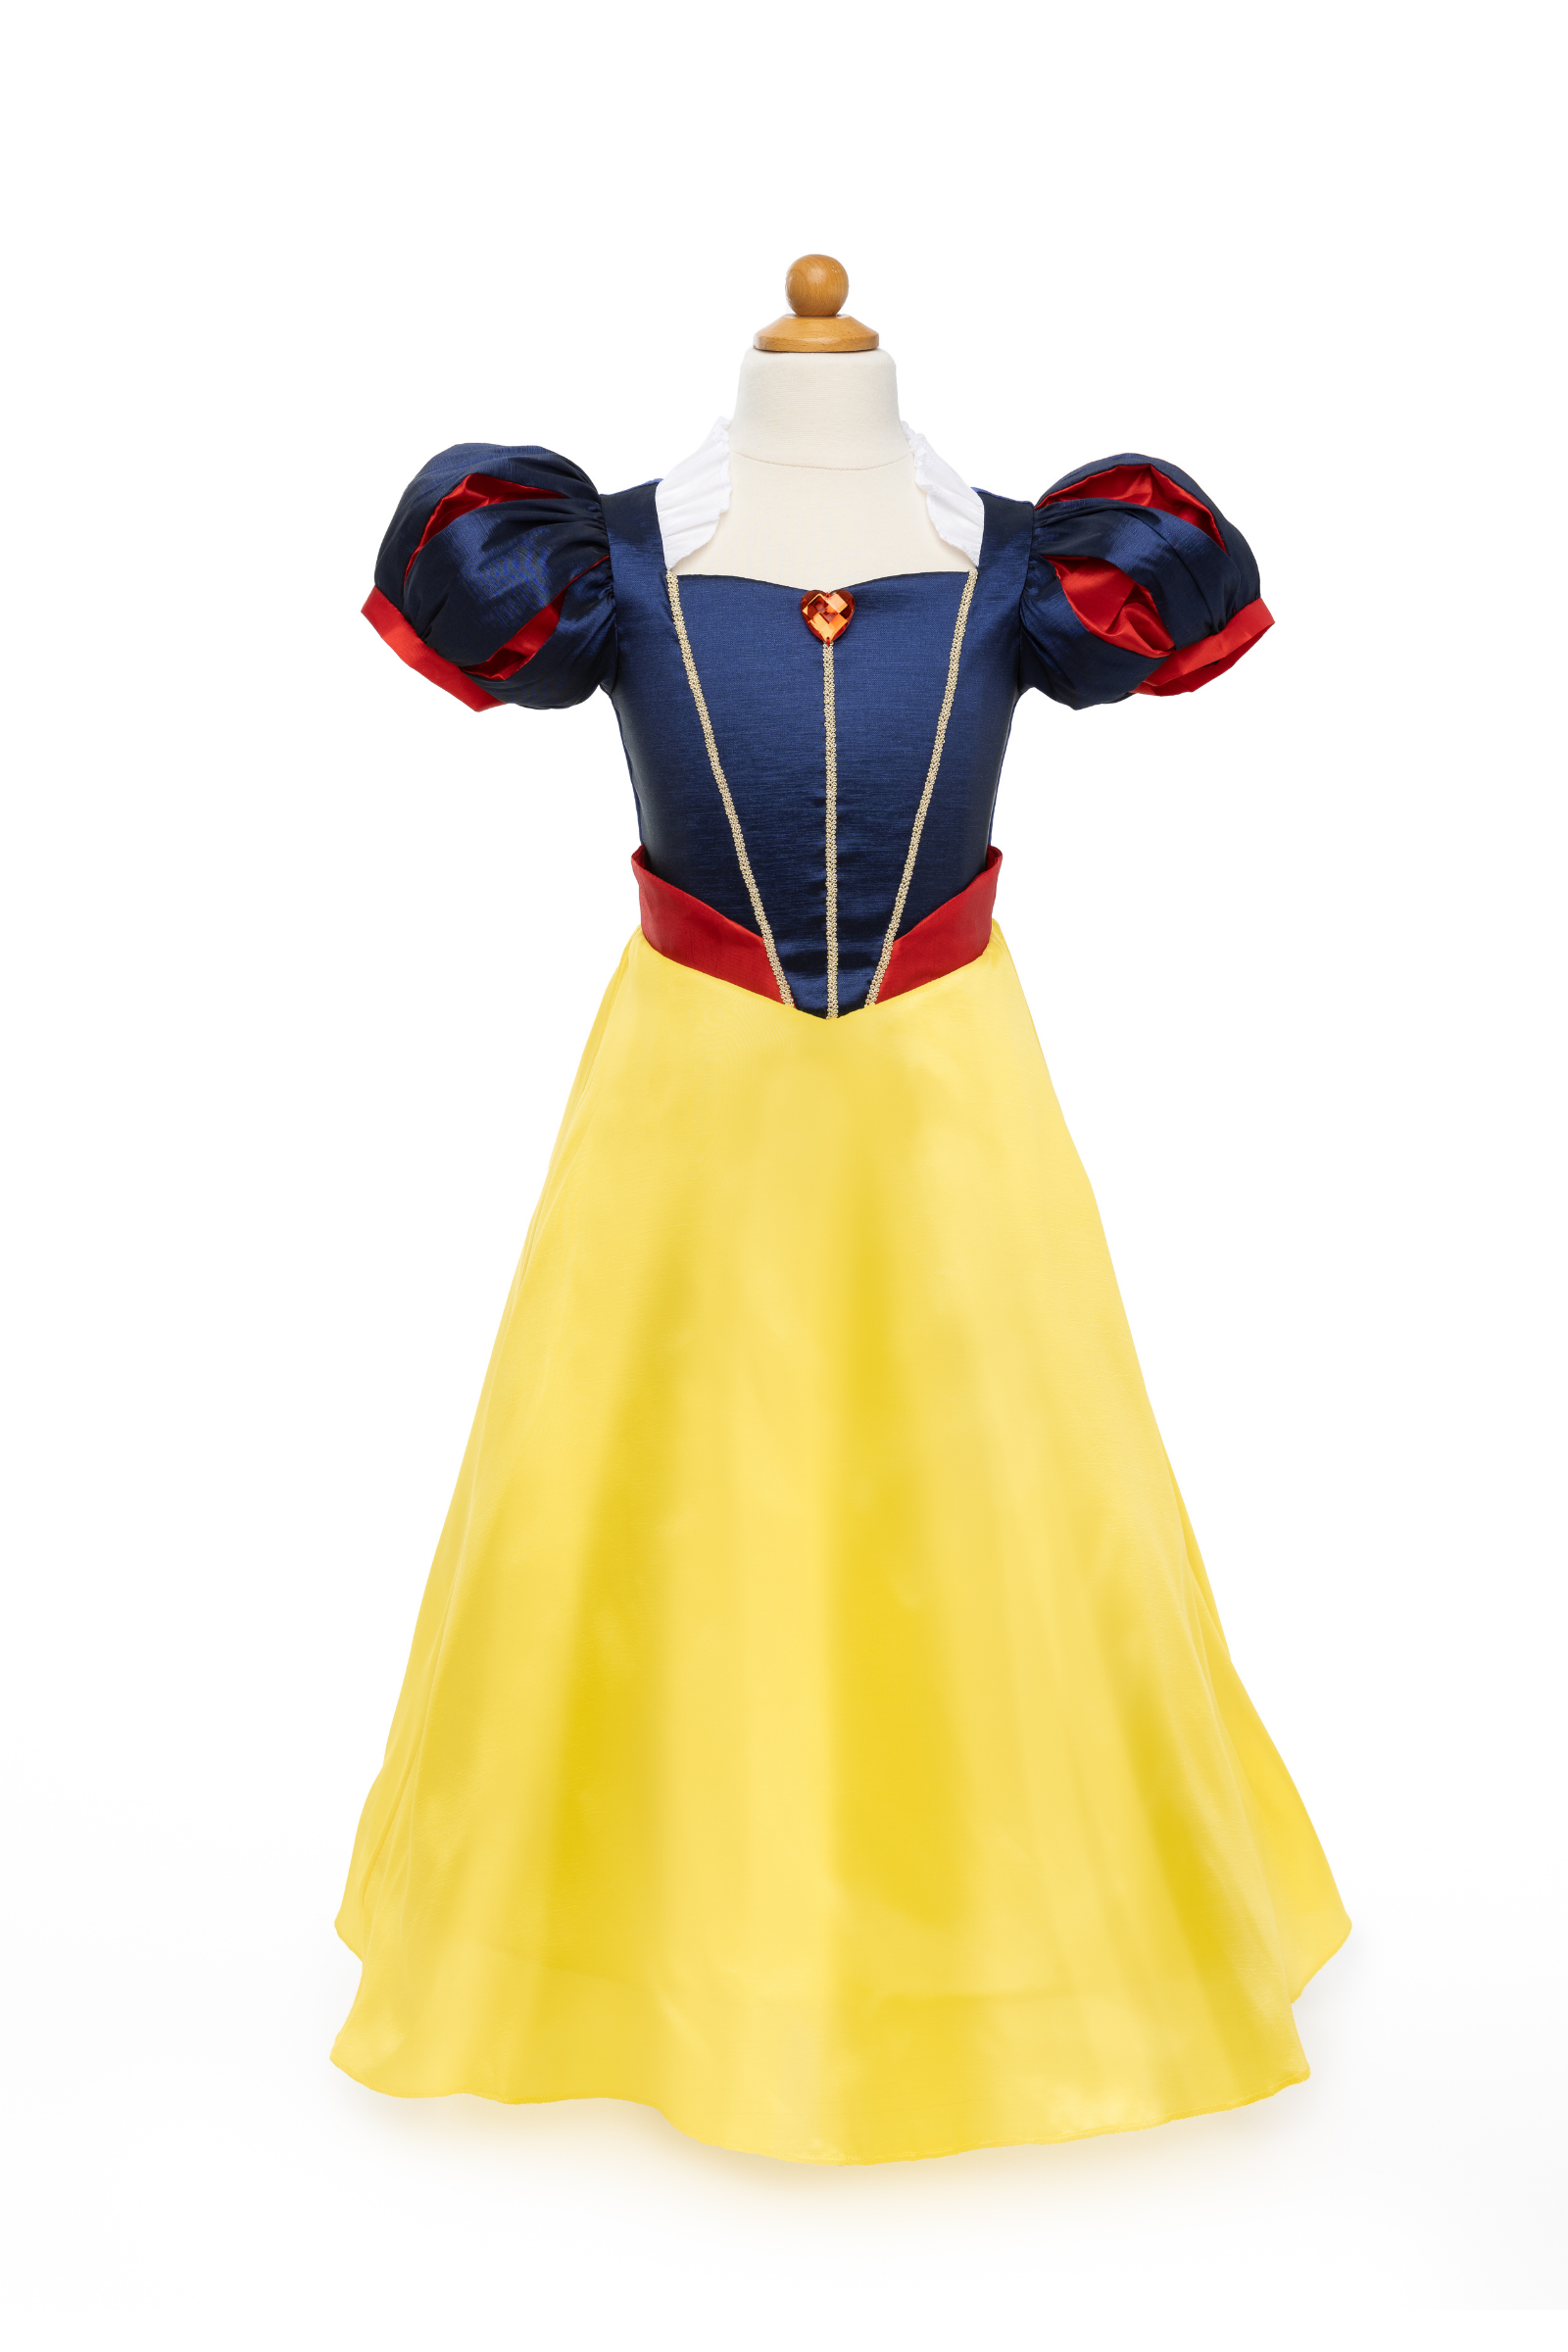 Disney Princess Snow White Costume for your Baby